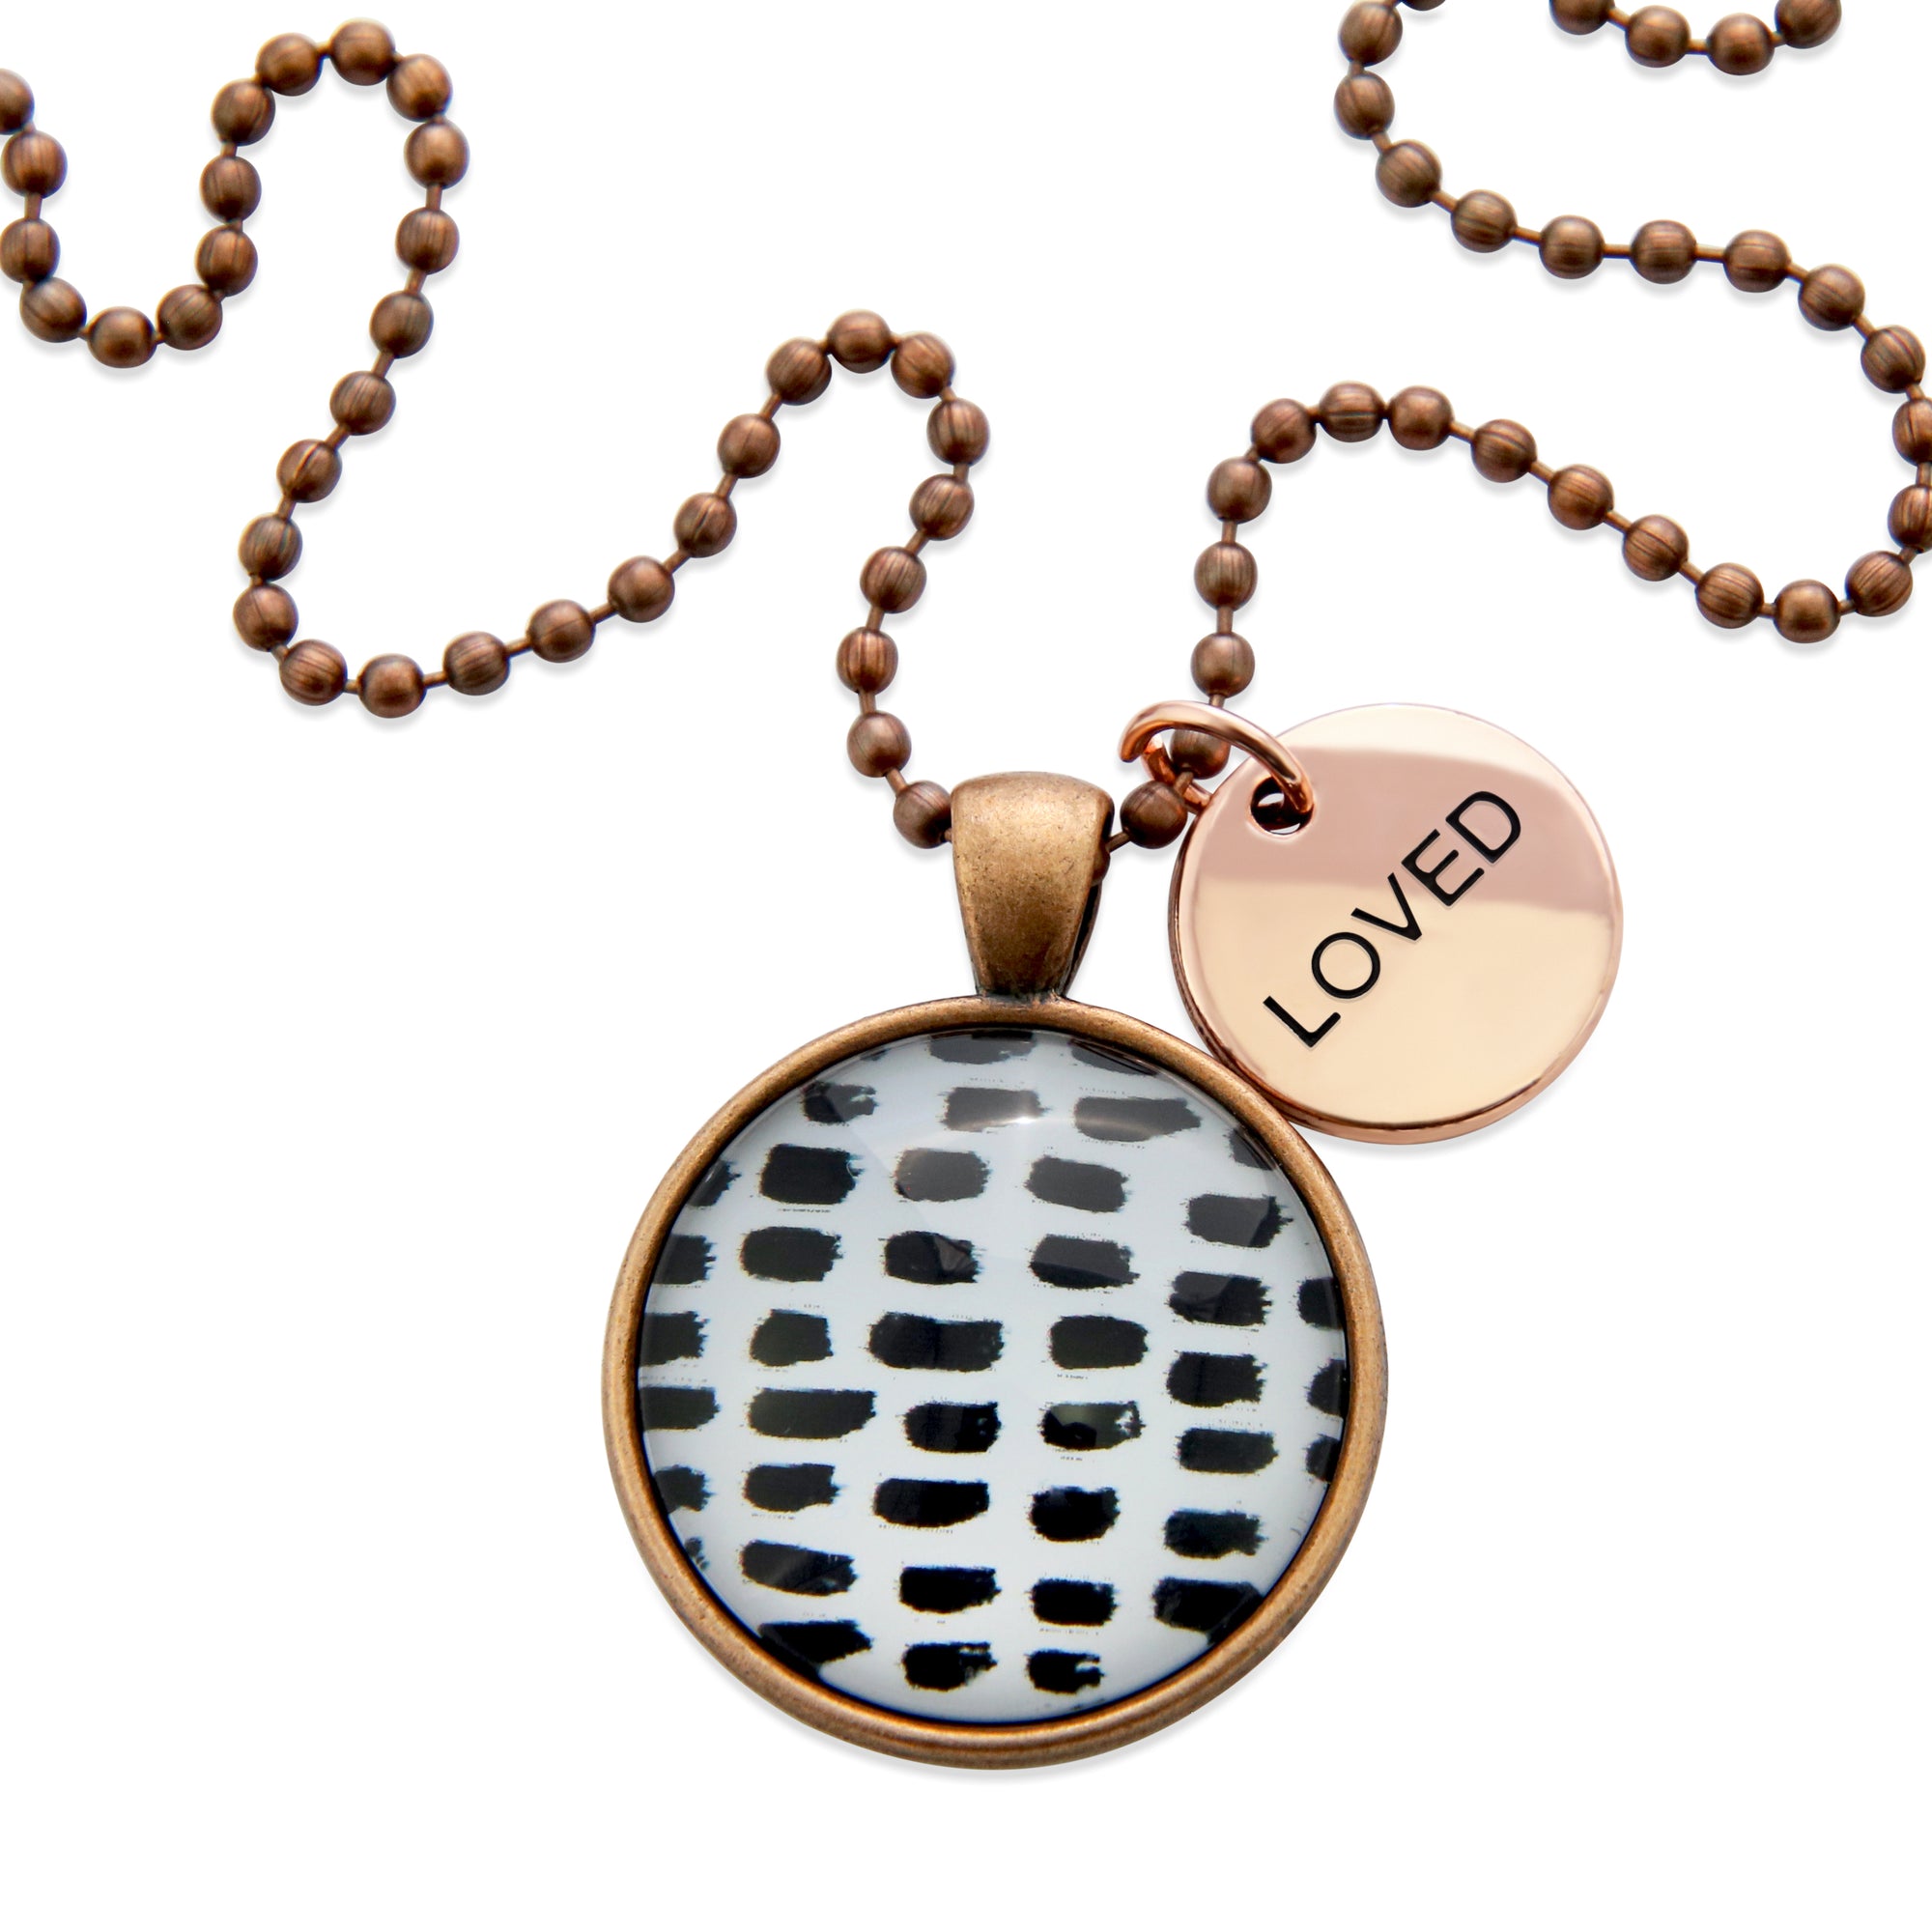 Black & White Collection - Vintage Copper 'LOVED' Necklace - Black Strokes (10362)